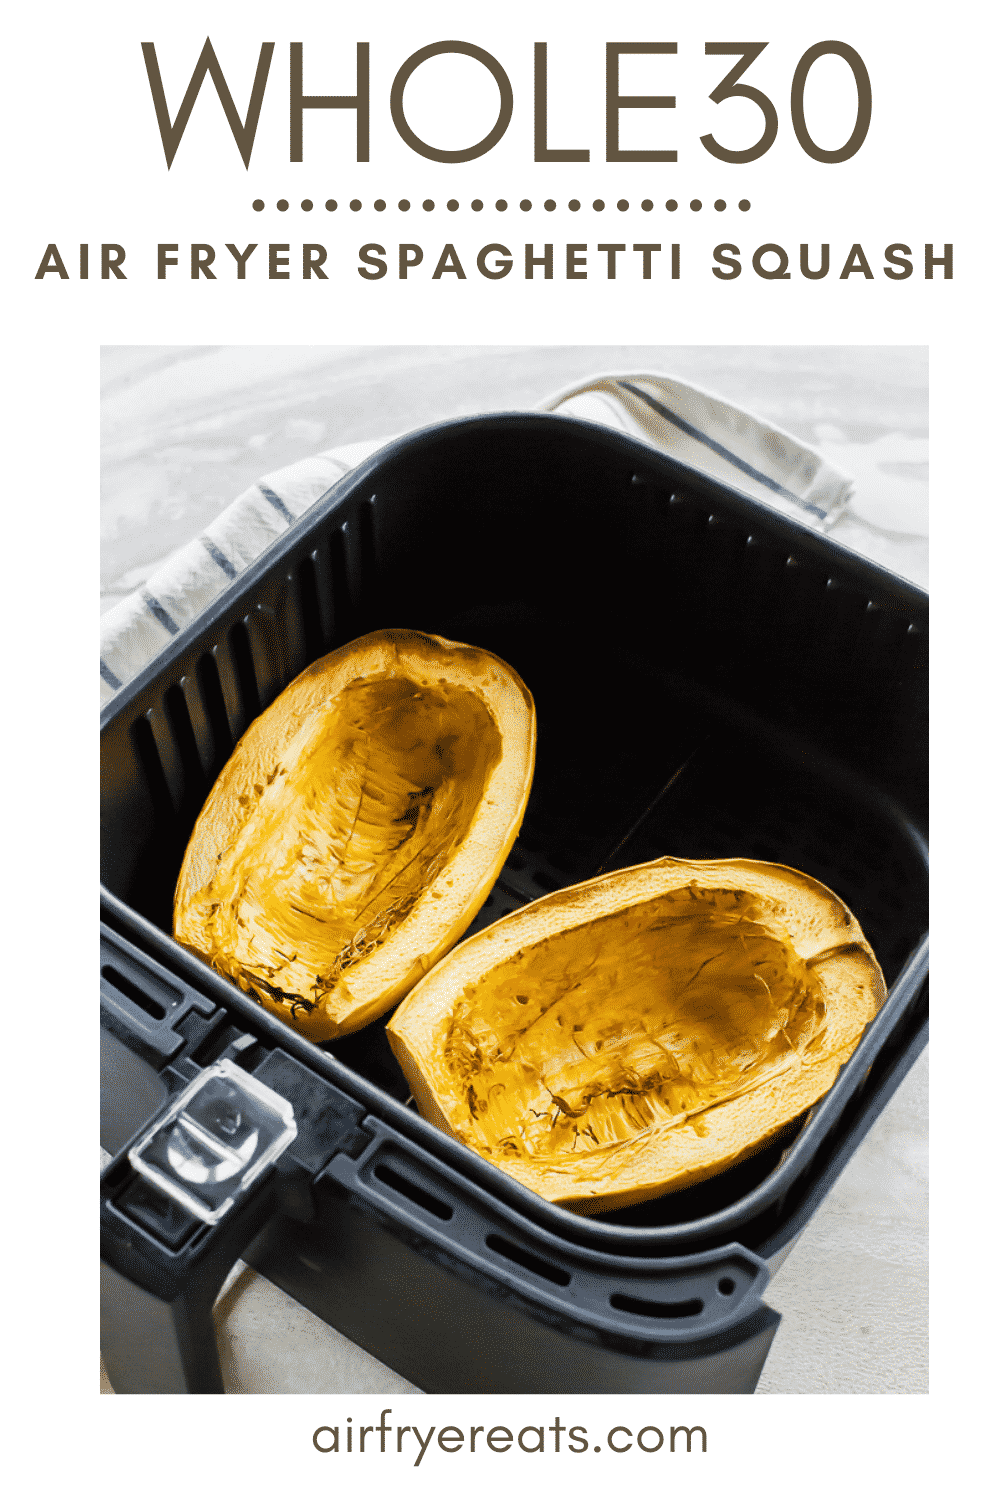 This Air Fryer Spaghetti Squash is just ONE ingredient and can be the base for so many main or side dishes! Make this your own a million different ways with seasonings, proteins, and sauces! #spaghettisquash #airfryerspaghettisquash #vegan via @vegetarianmamma